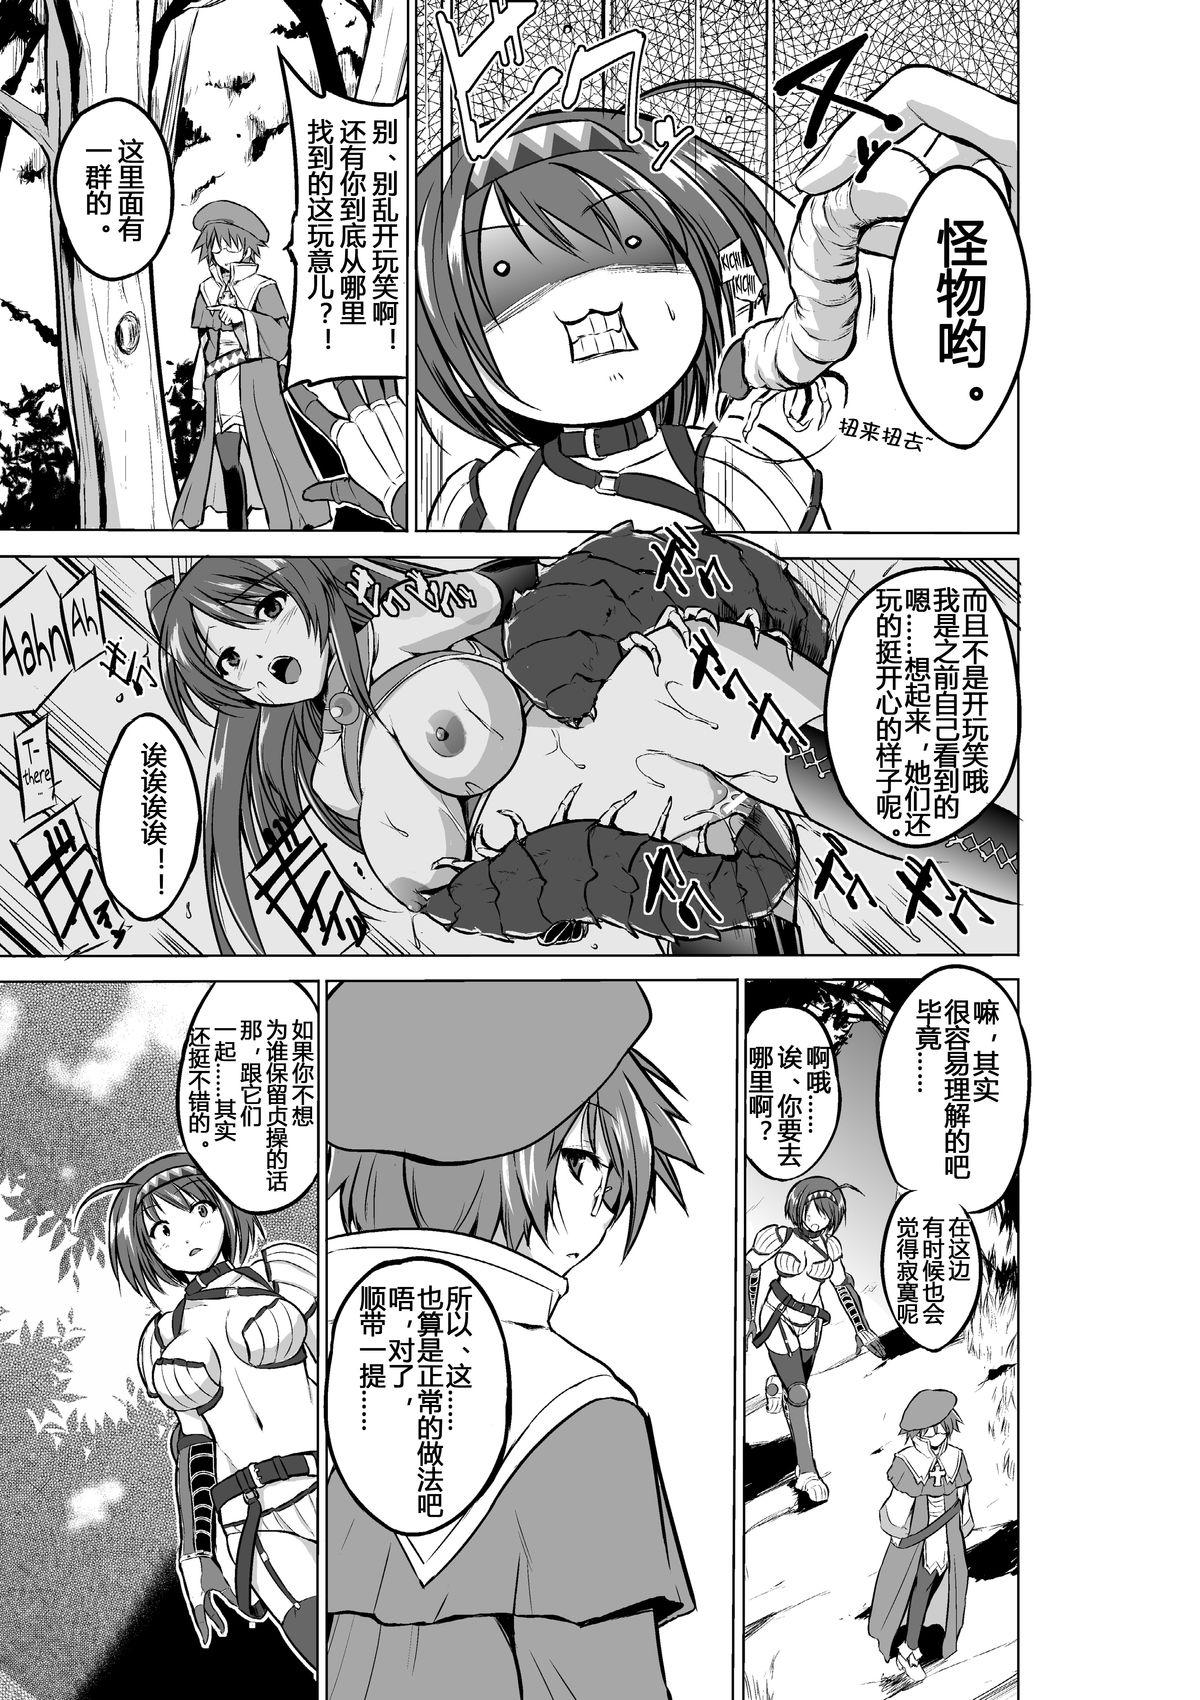 Thai Dungeon Travelers - Chie no Himegoto - Toheart2 Blow Job - Page 5